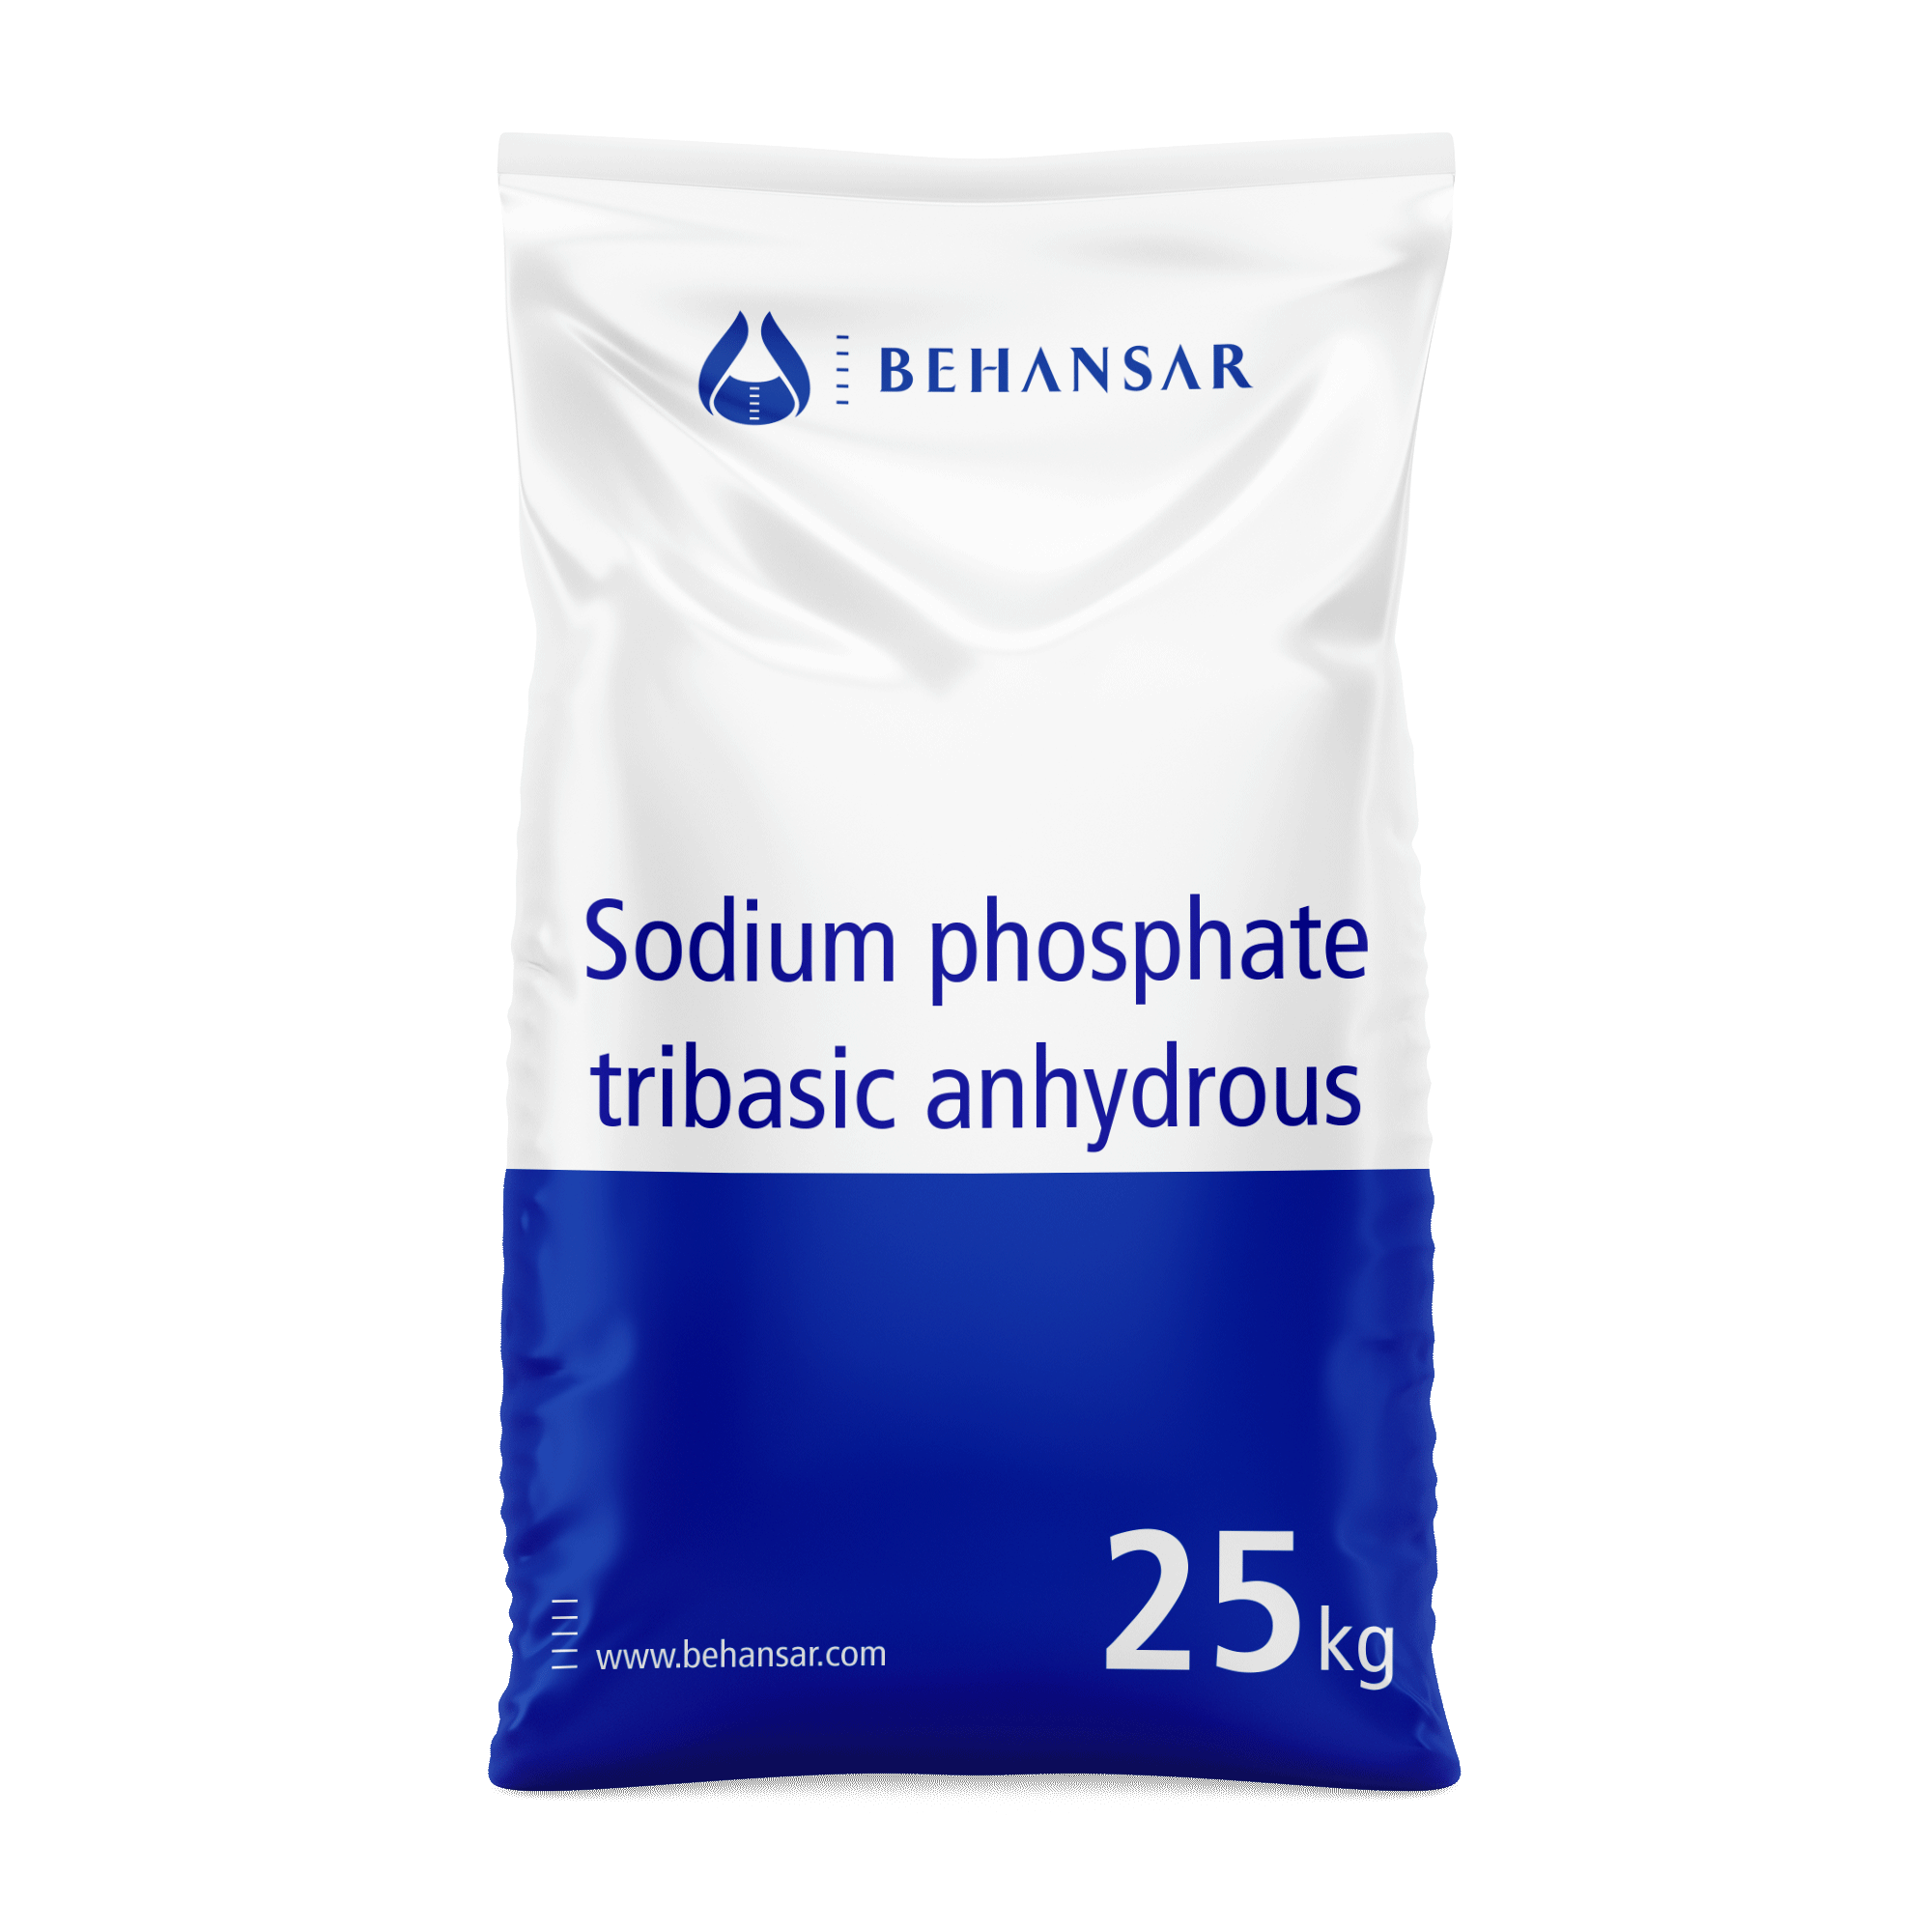 Sodium phosphate tribasic anhydrous is one of the products of Behansar Co